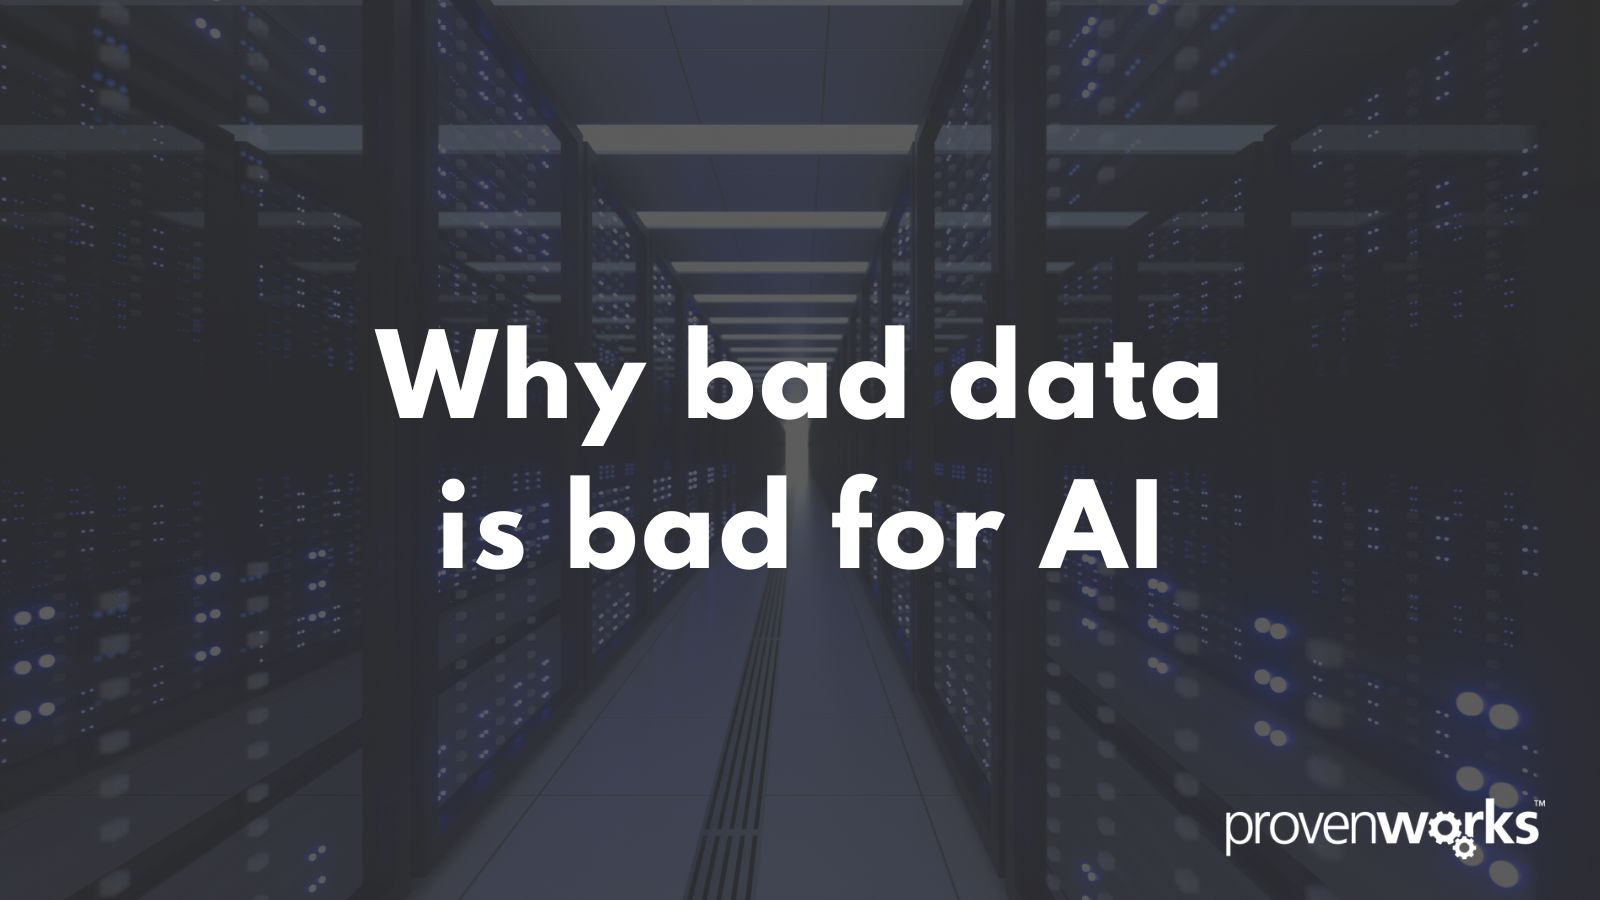 Prepare your data for AI: why bad data is bad for AI